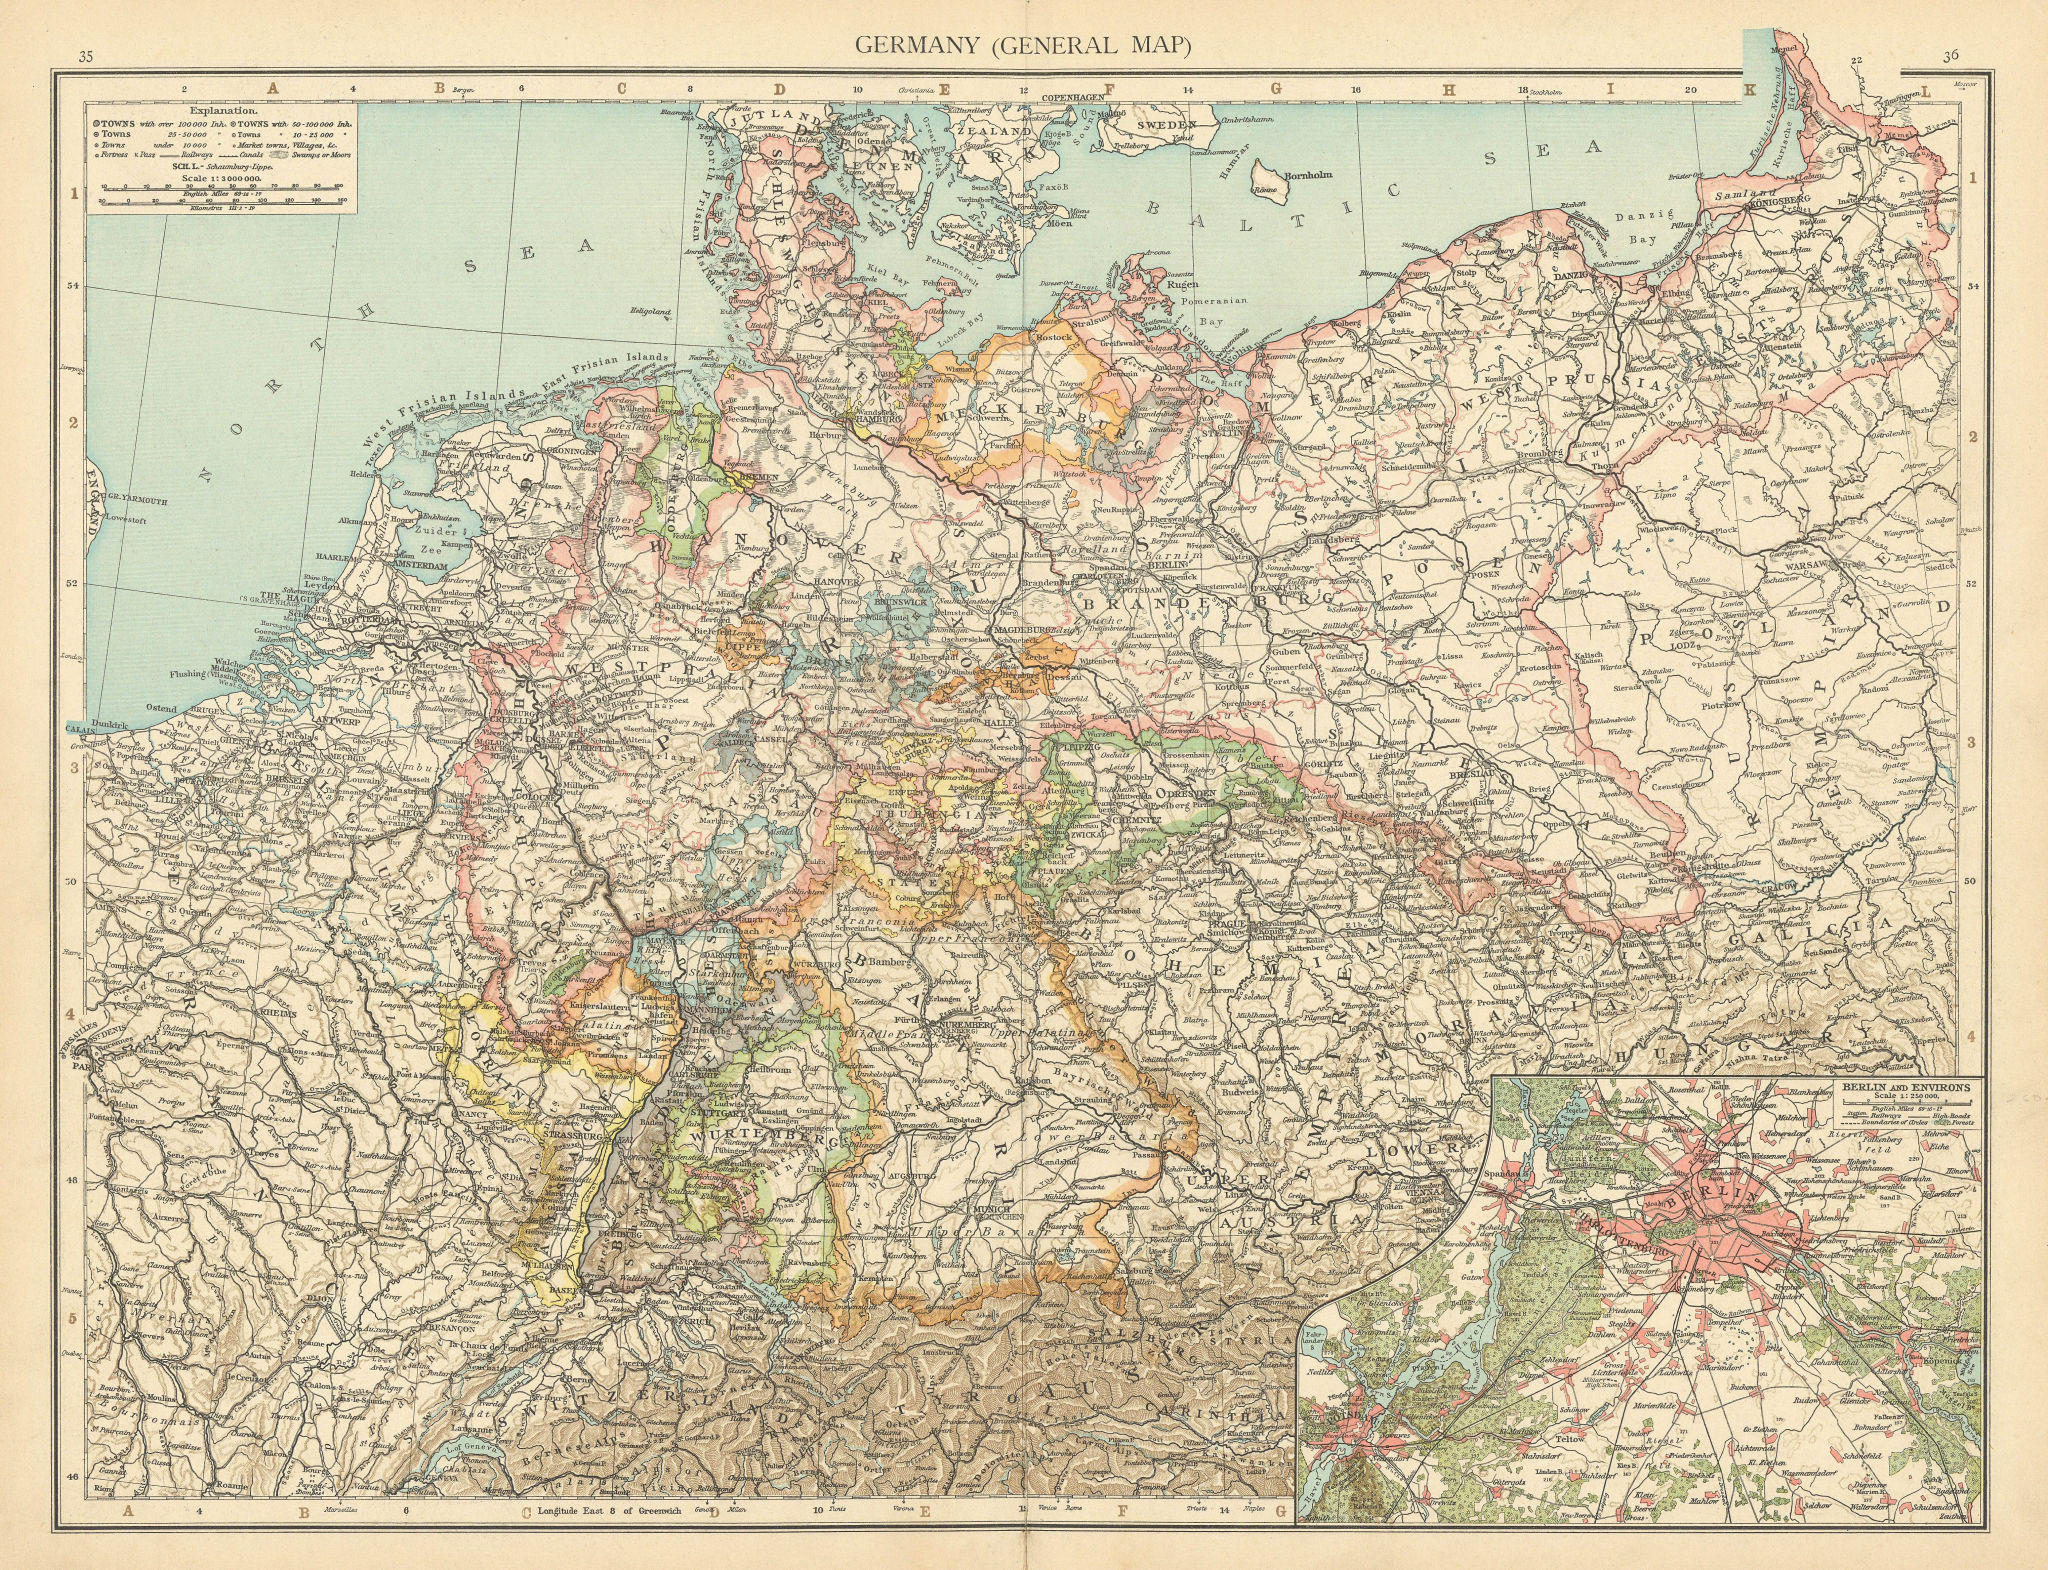 Germany. Poland Prussia. Berlin environs. Benelux. THE TIMES 1895 old map